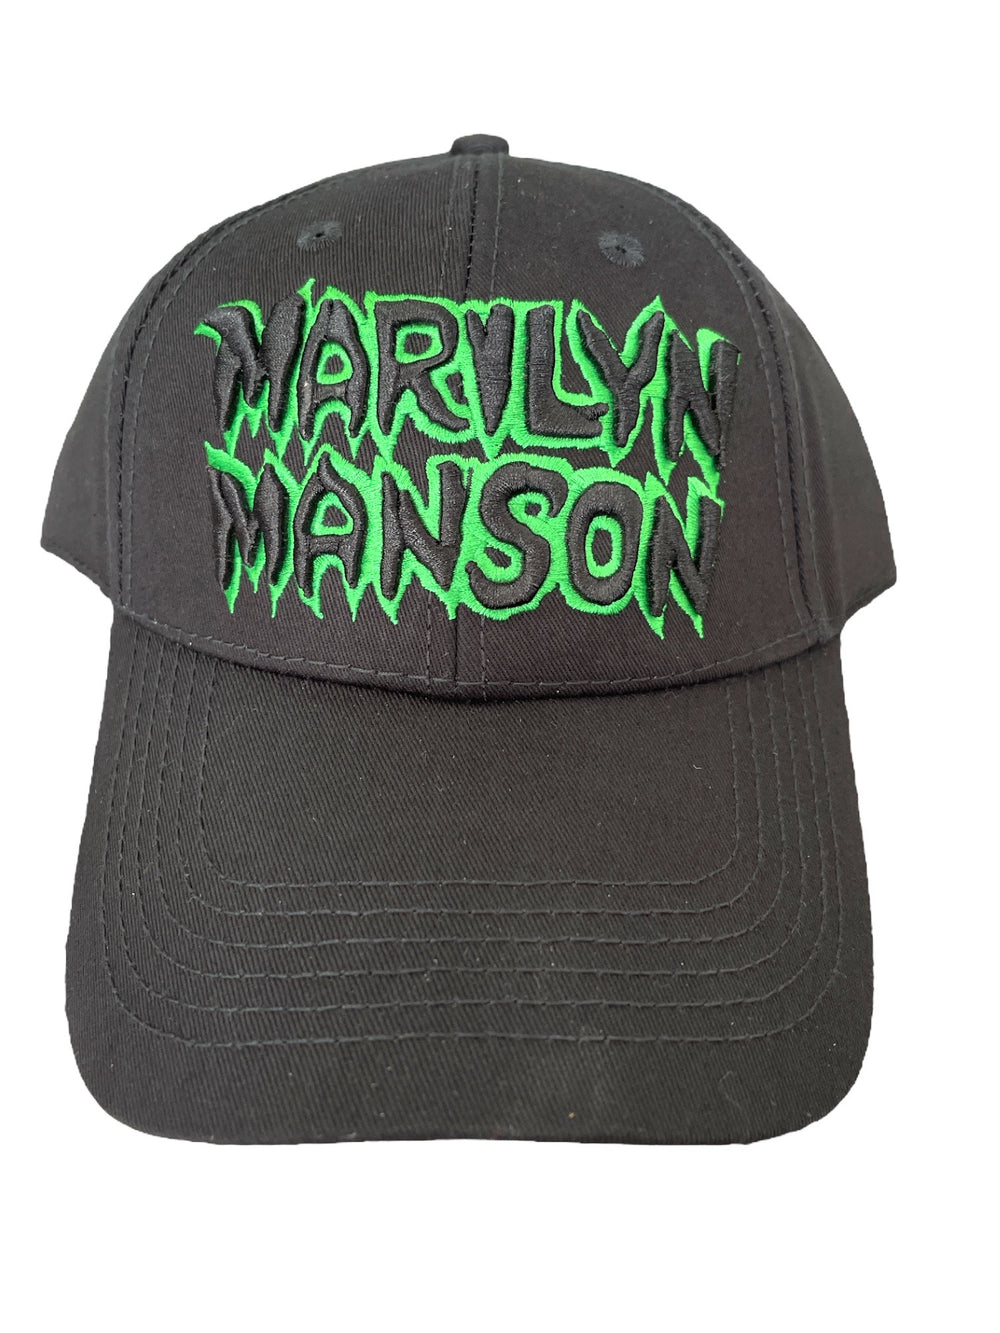 Marilyn Manson Name Logo Official Chunky Embroidered Peak Cap Adjustable